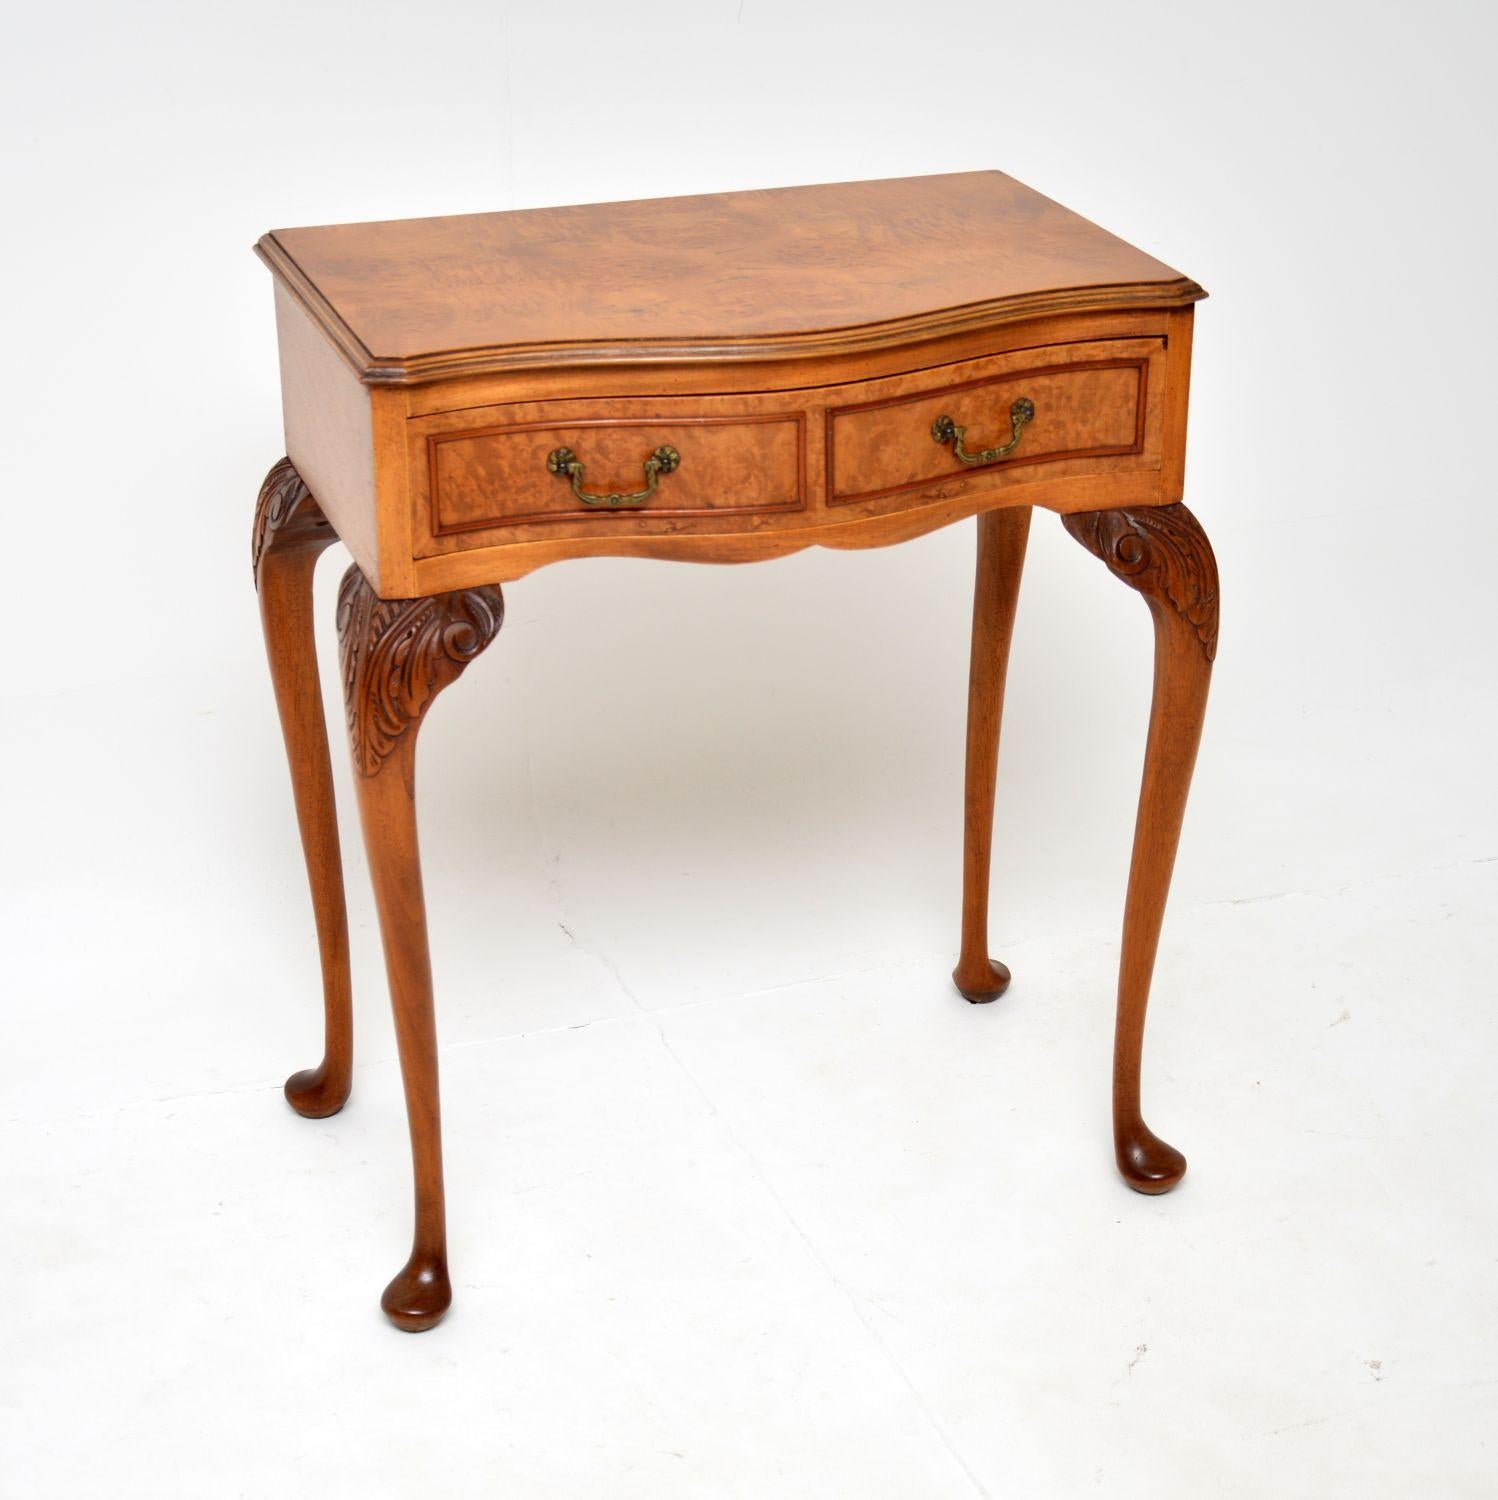 A gorgeous antique side table in burr walnut. This is in the Queen Anne style, it was made England and dates from around the 1930’s.

It is of lovely quality and is a useful size, perfect for use as a console or side table in various places around